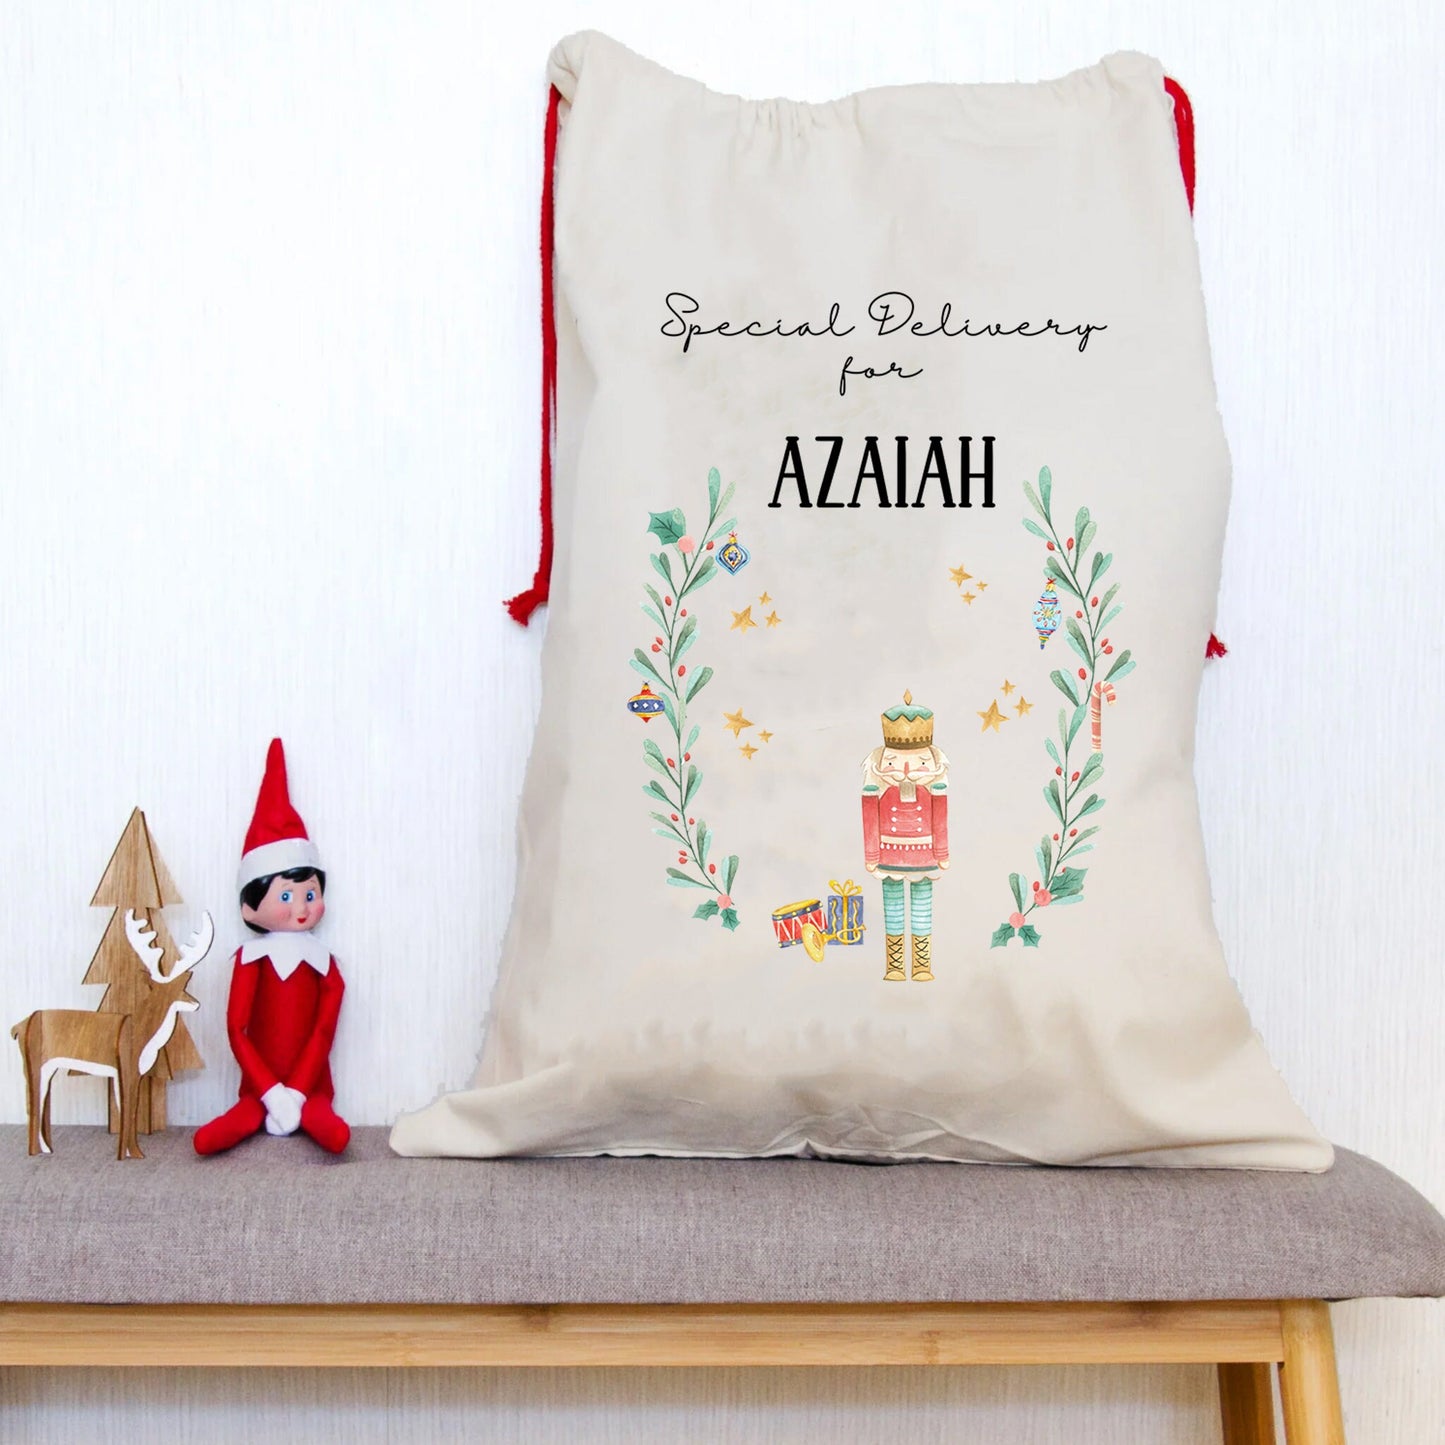 Personalised Santa Sack, Christmas Sack, Special Delivery Christmas Eve Box, Girl or Boy Initial Name Christmas Toy Sack